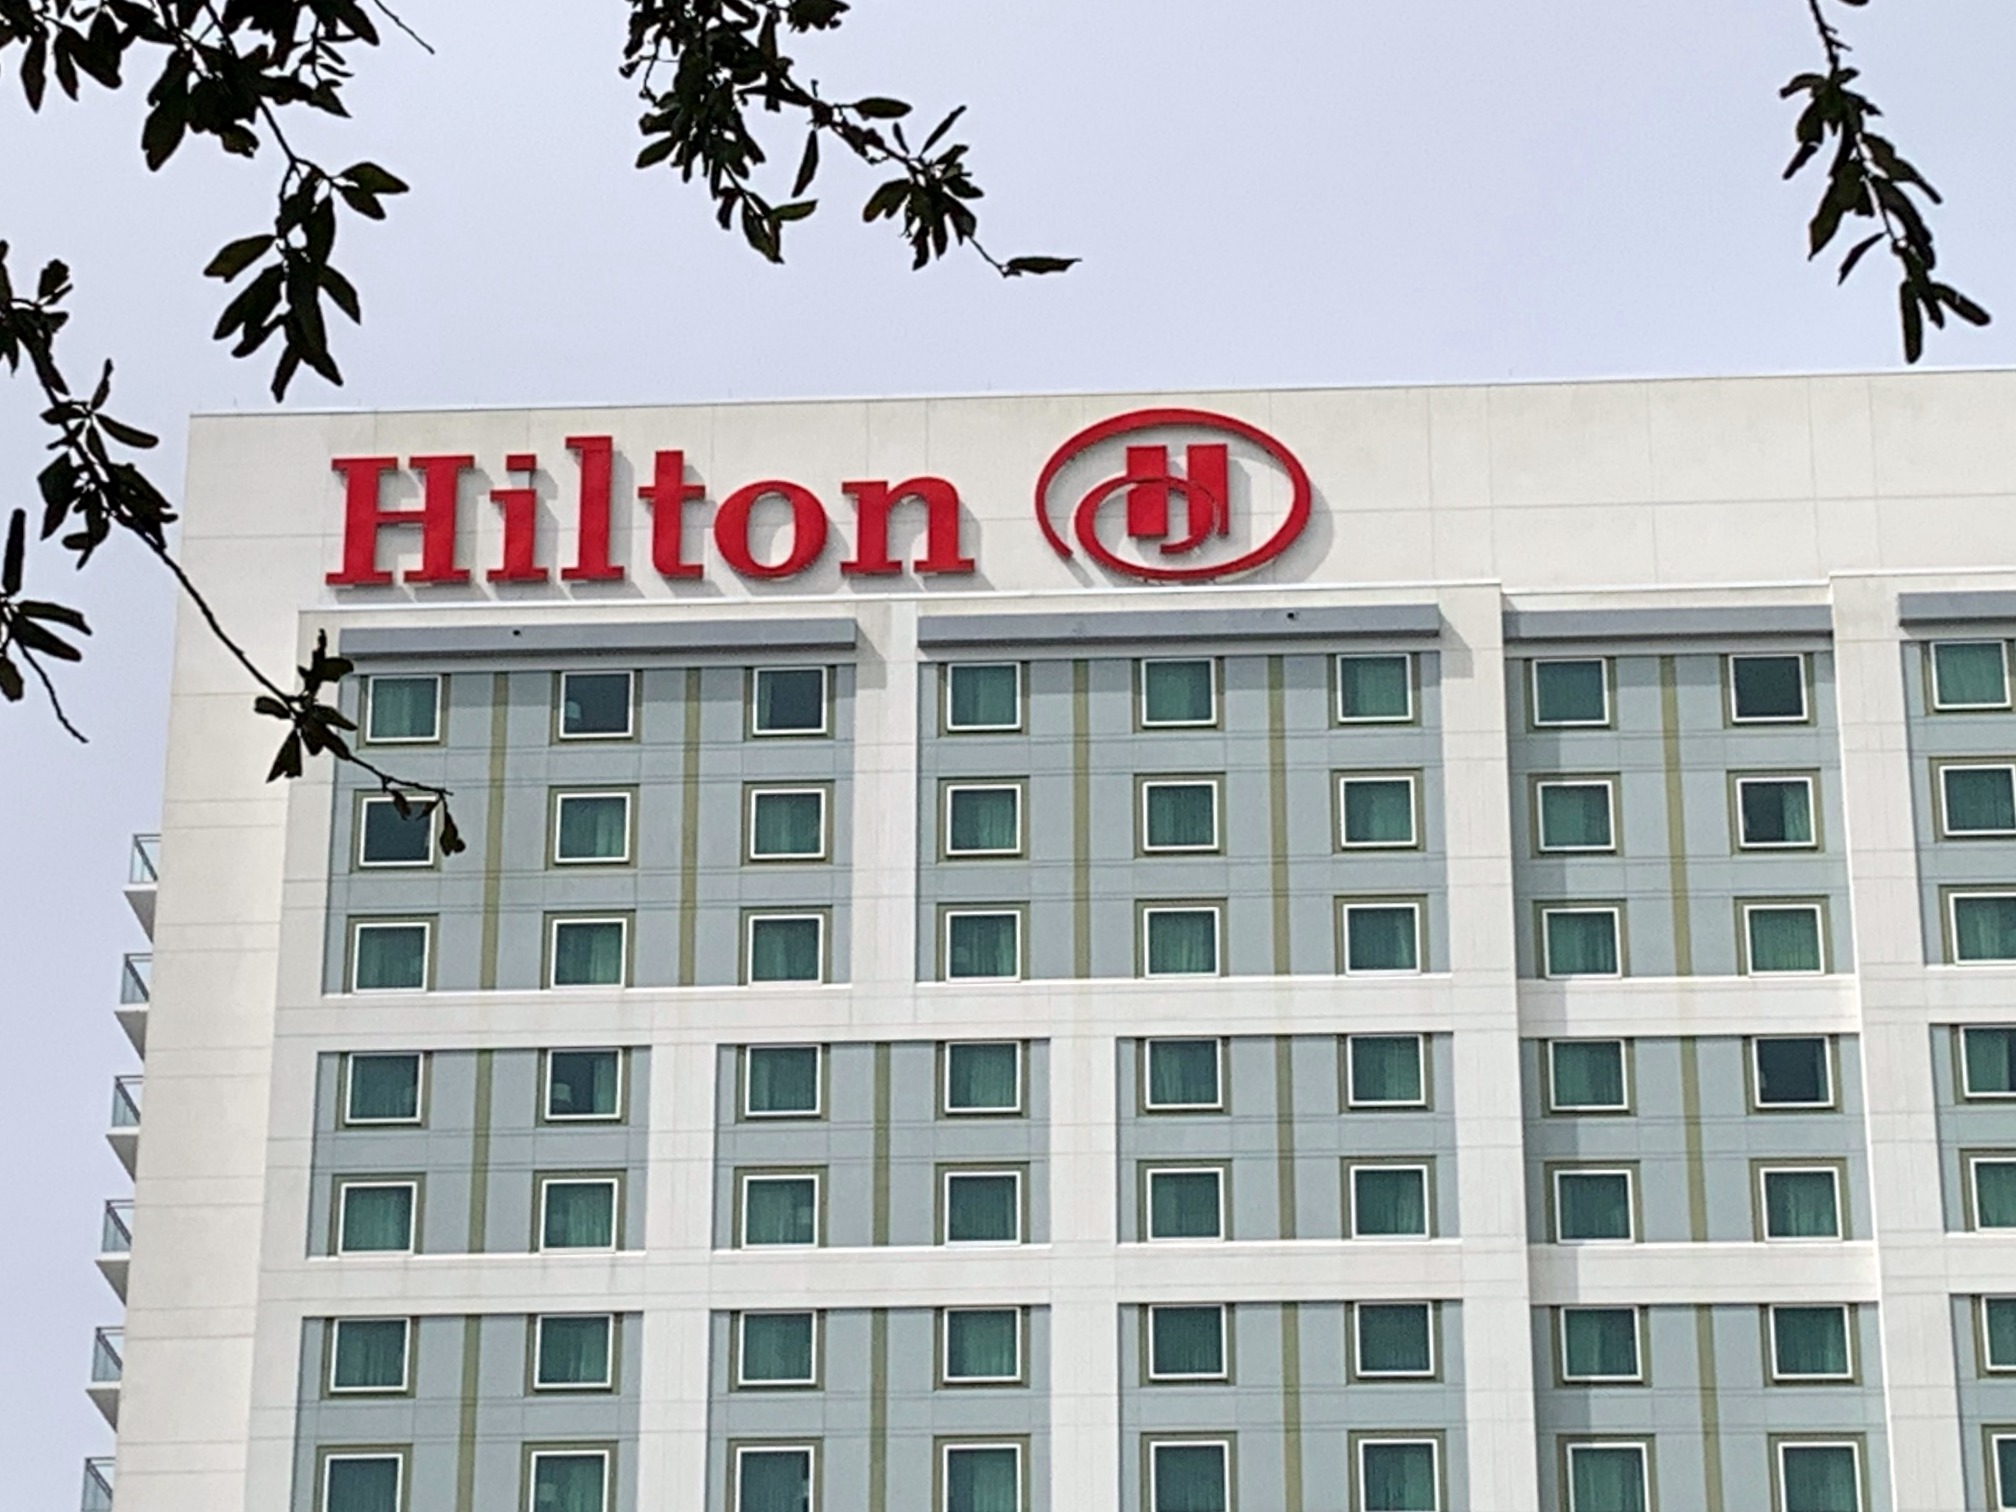 Devaluation: More Hilton Honors Increases Hotels Cost Over 100K Points